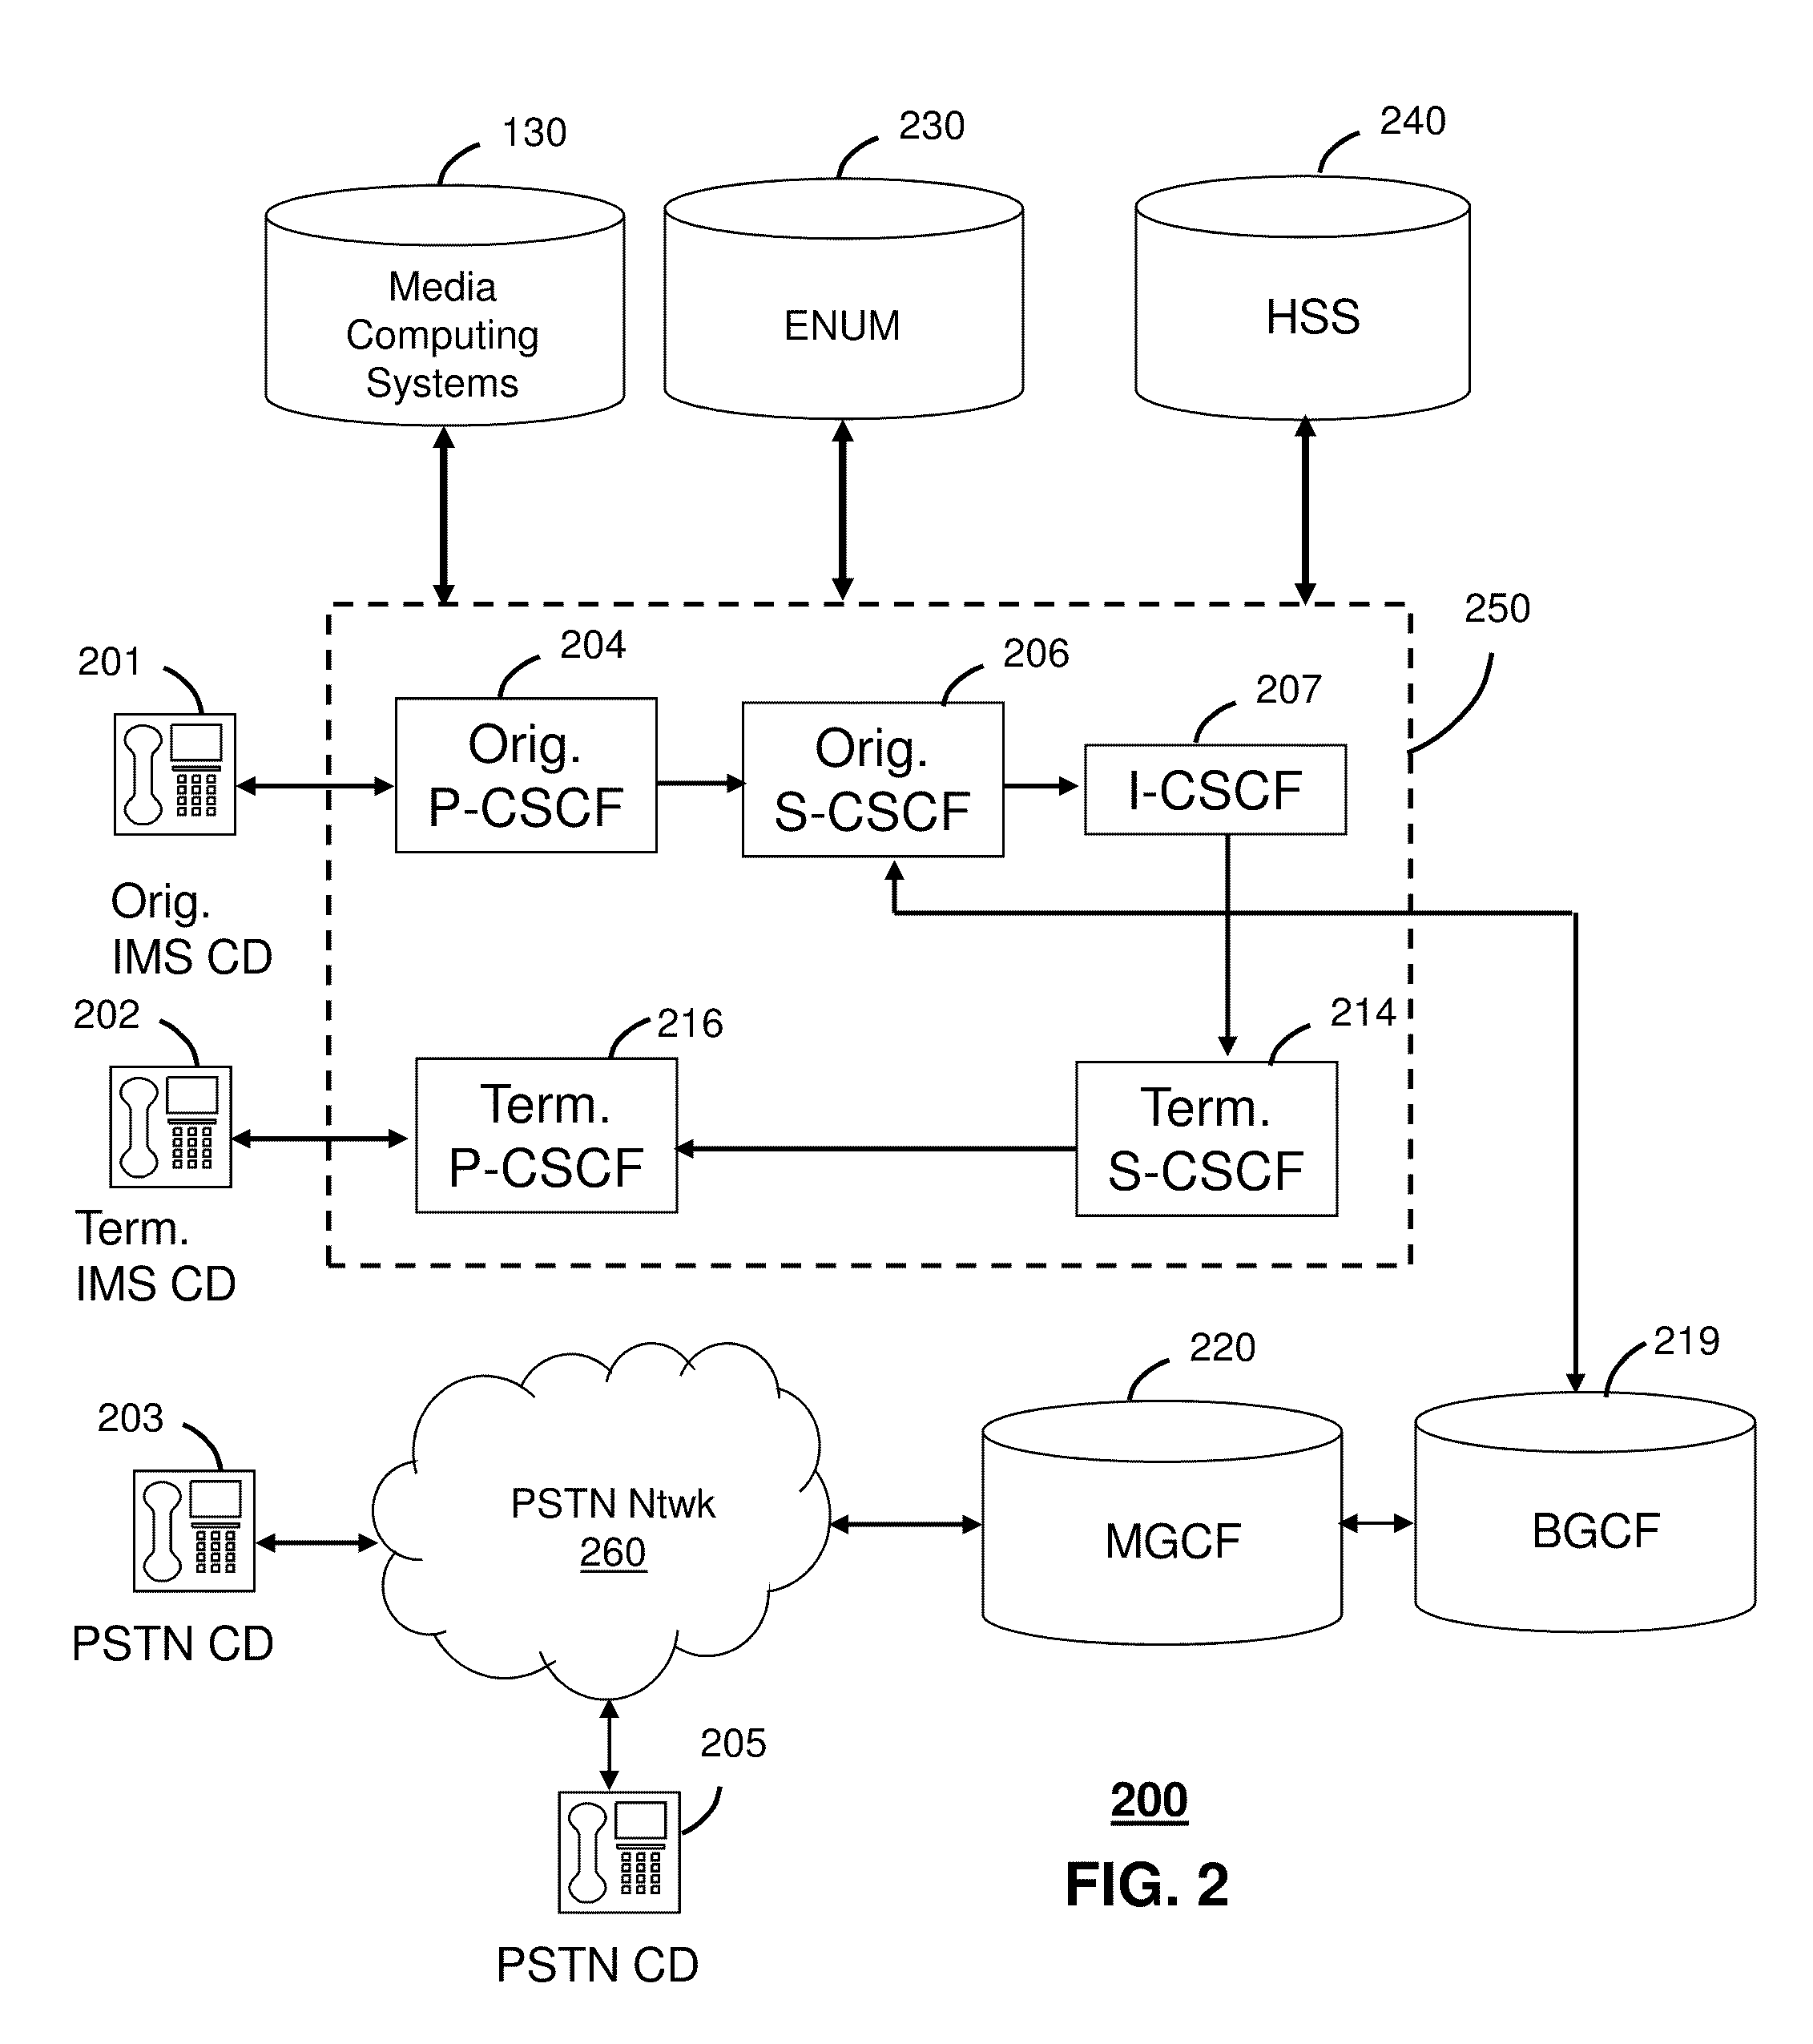 Apparatus for adapting a presentation of media content to a requesting device